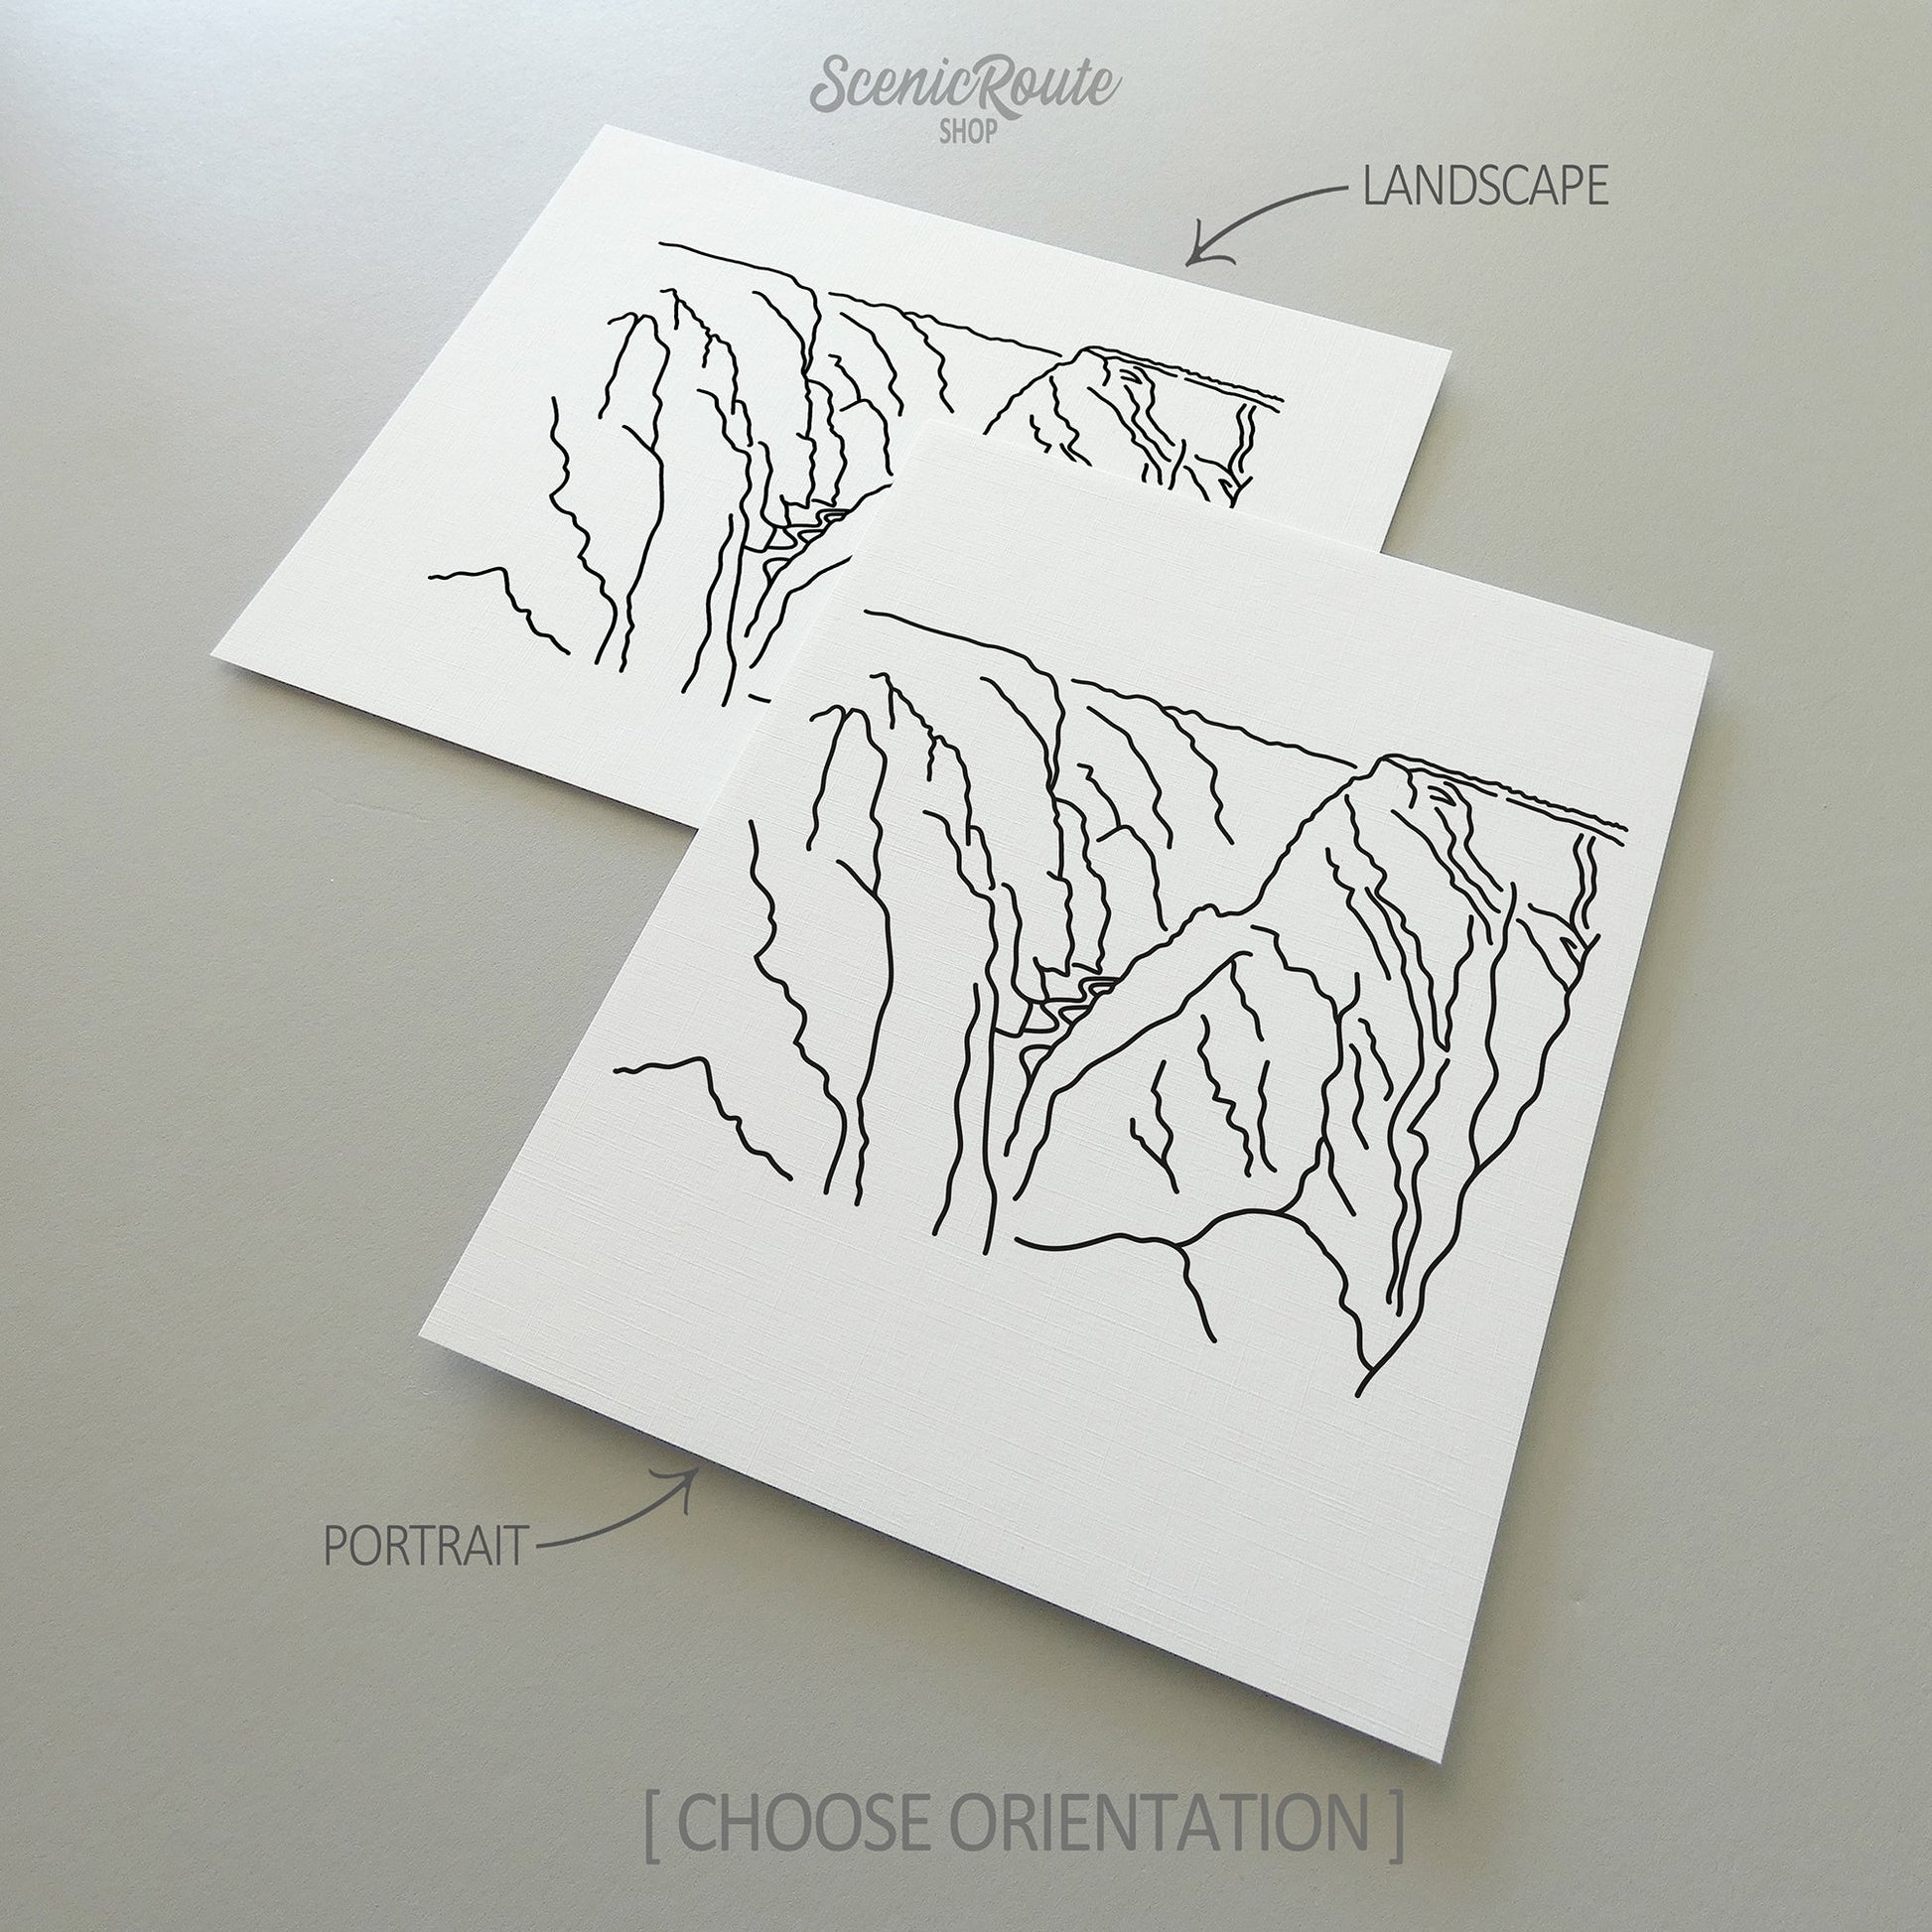 Two line art drawings of Black Canyon of the Gunnison National Park on white linen paper with a gray background.  The pieces are shown in portrait and landscape orientation for the available art print options.